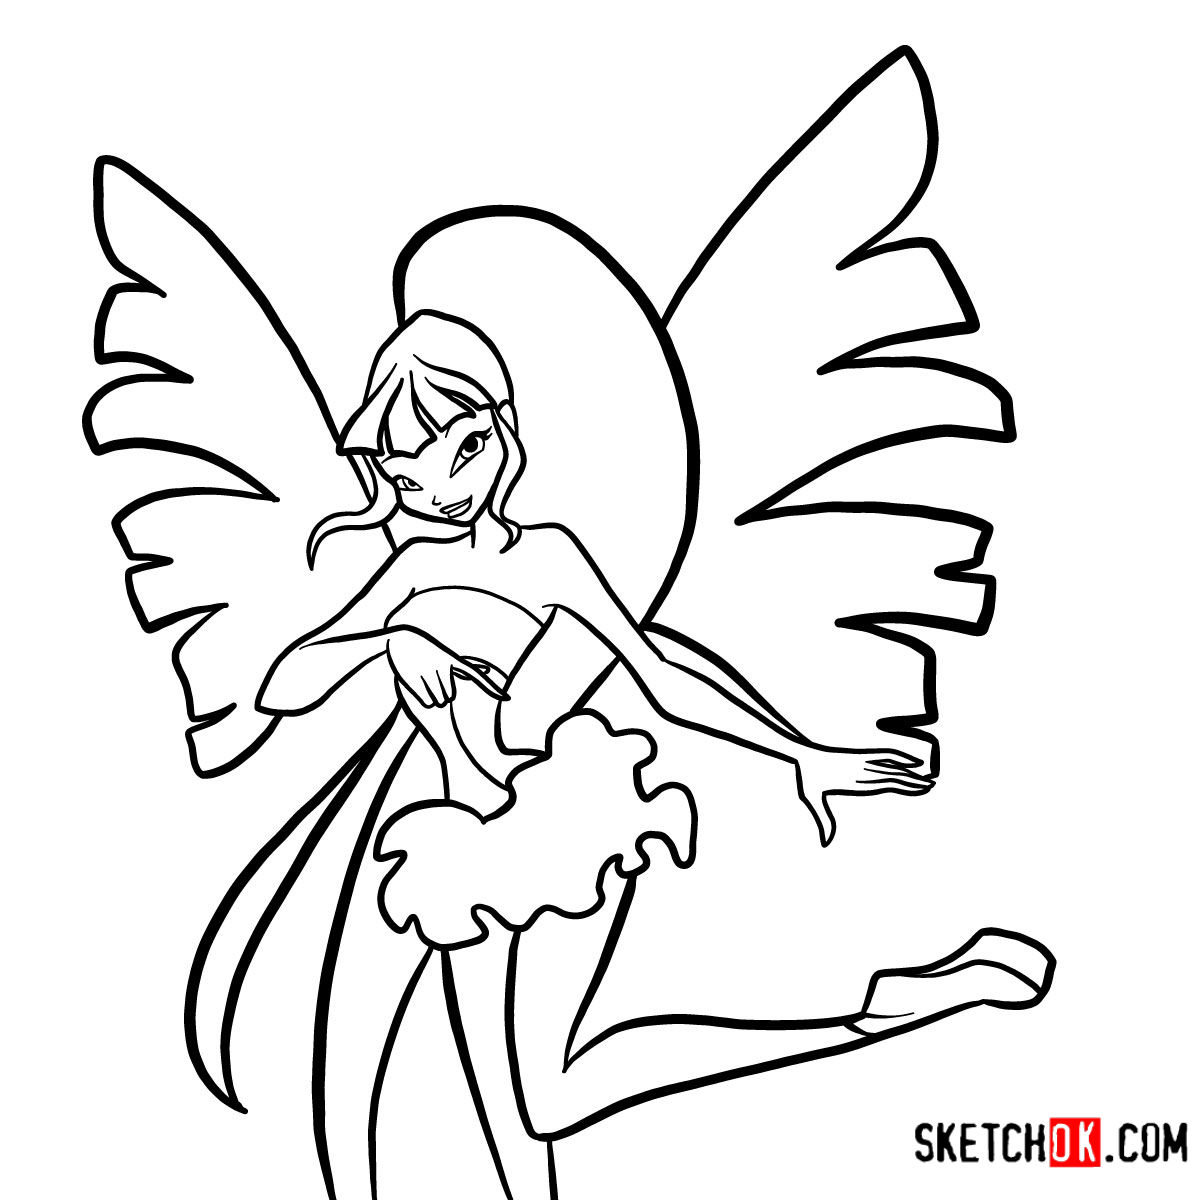 How to draw Musa Serenix from Winx